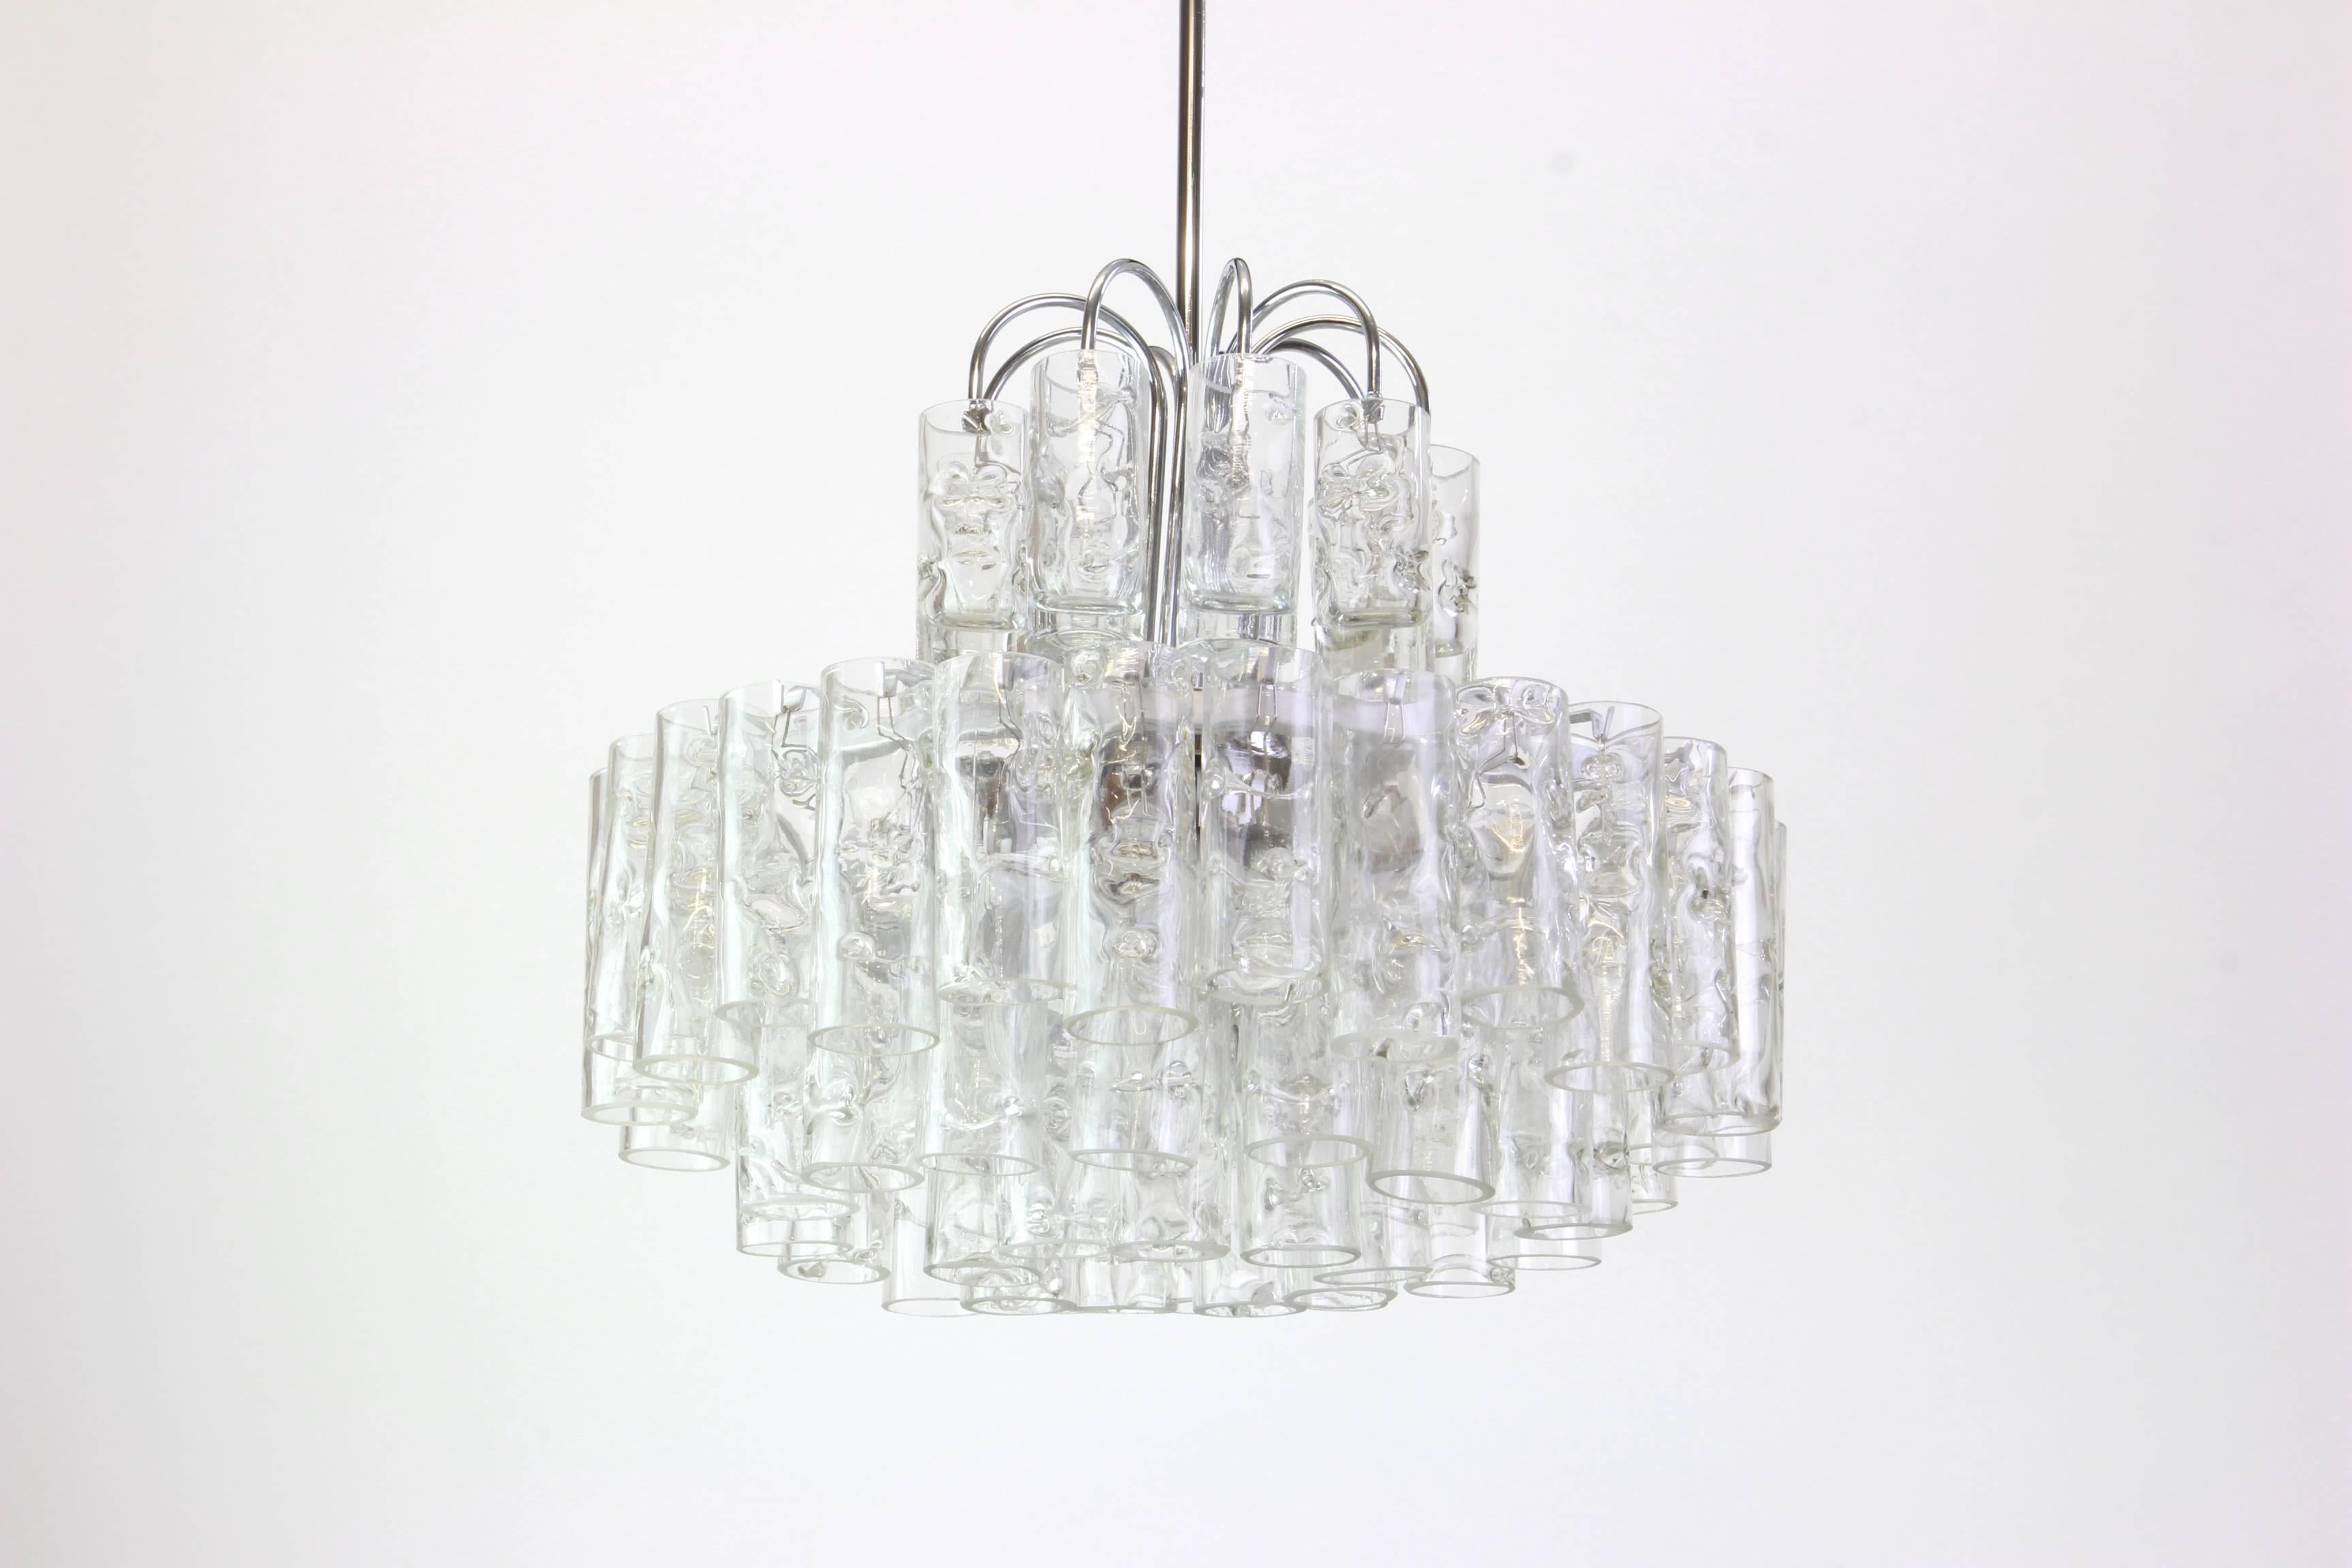 Fantastic four-tier midcentury chandelier by Doria, Germany manufactured, circa 1960-1969. Murano glass cylinders suspended from the fixture.

High quality and in very good condition. Cleaned, well-wired and ready to use. 

The fixture requires 7 x